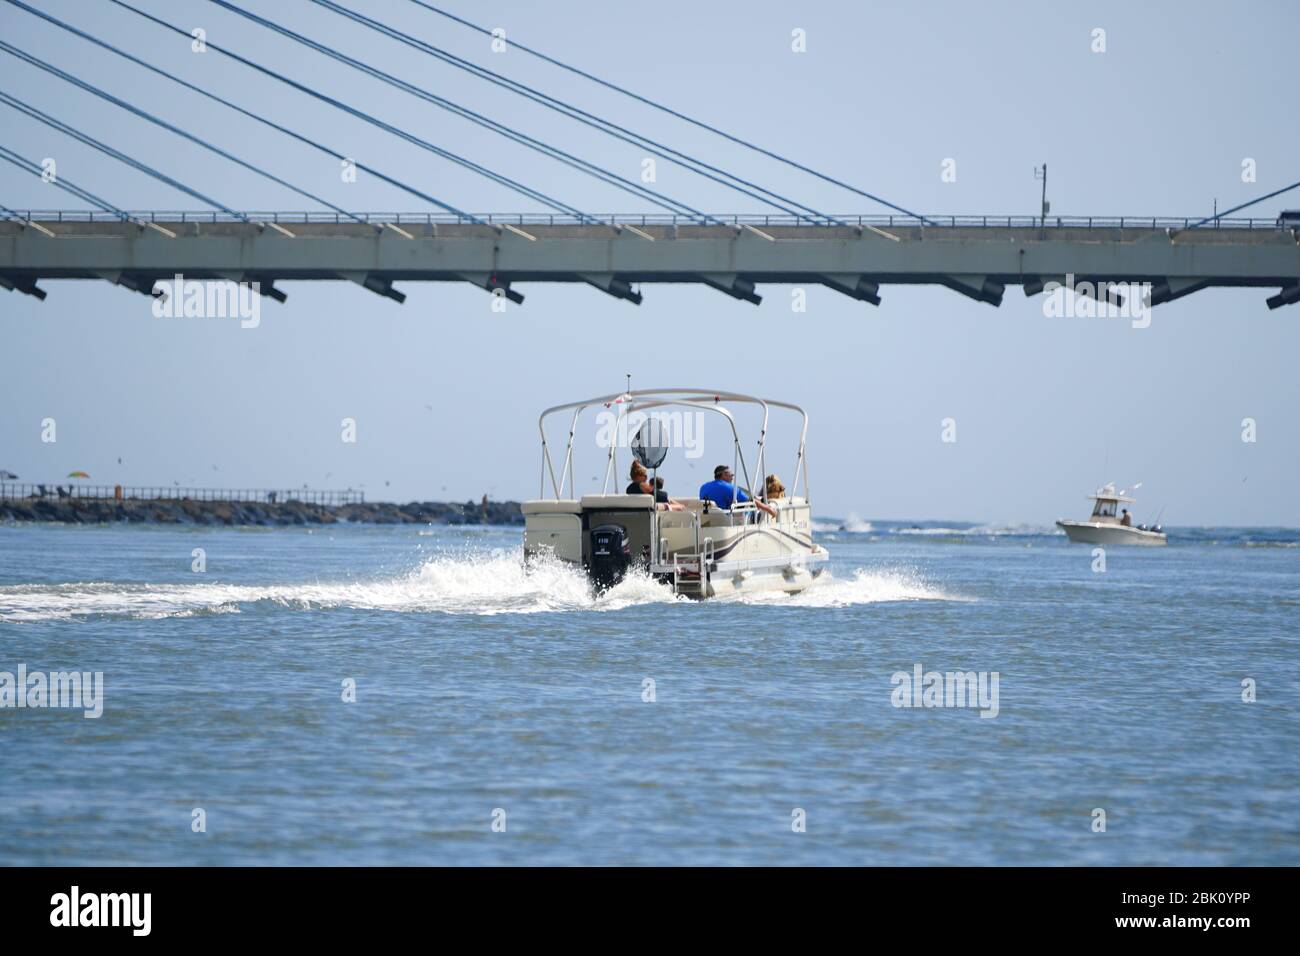 Bethany Beach, Delaware, U.S.A - September 2, 2019 - A pontoon boat on the move under the Indian River bridge Stock Photo